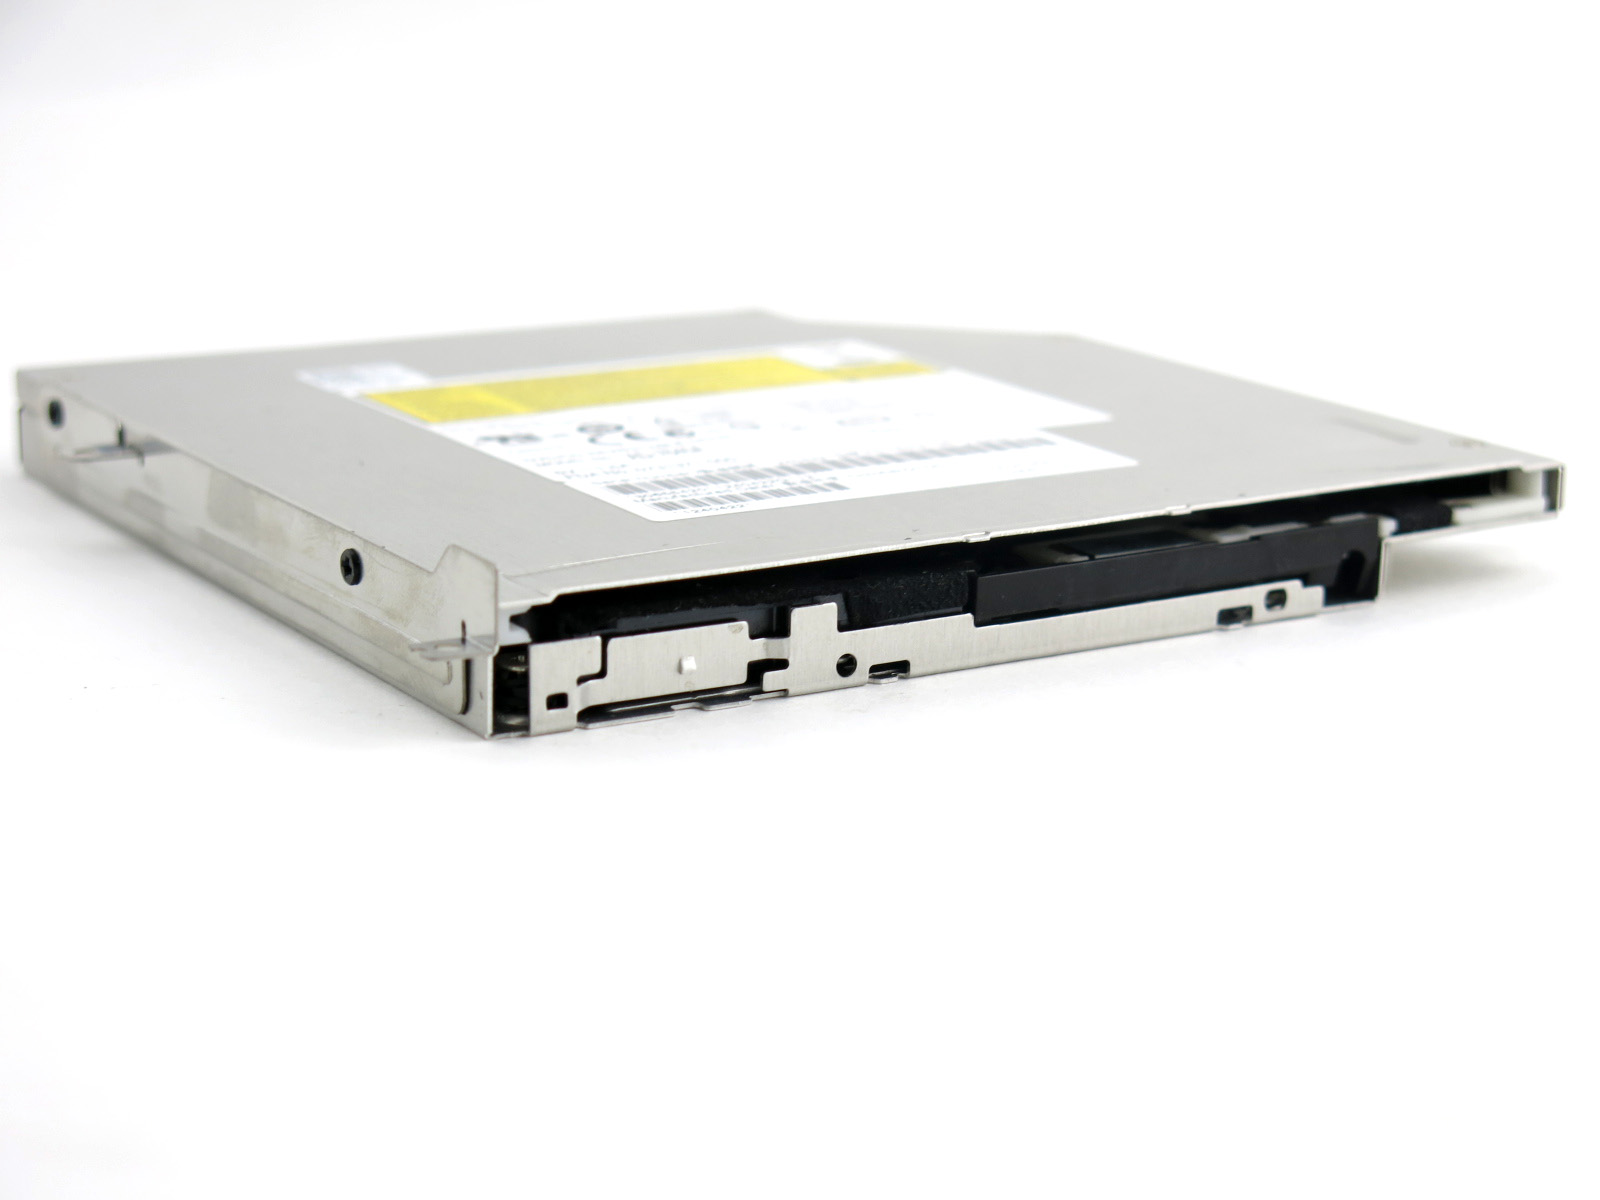 Sony AD-7640A Optical Drive 12.7mm IDE Slot Load CD DVD Writer